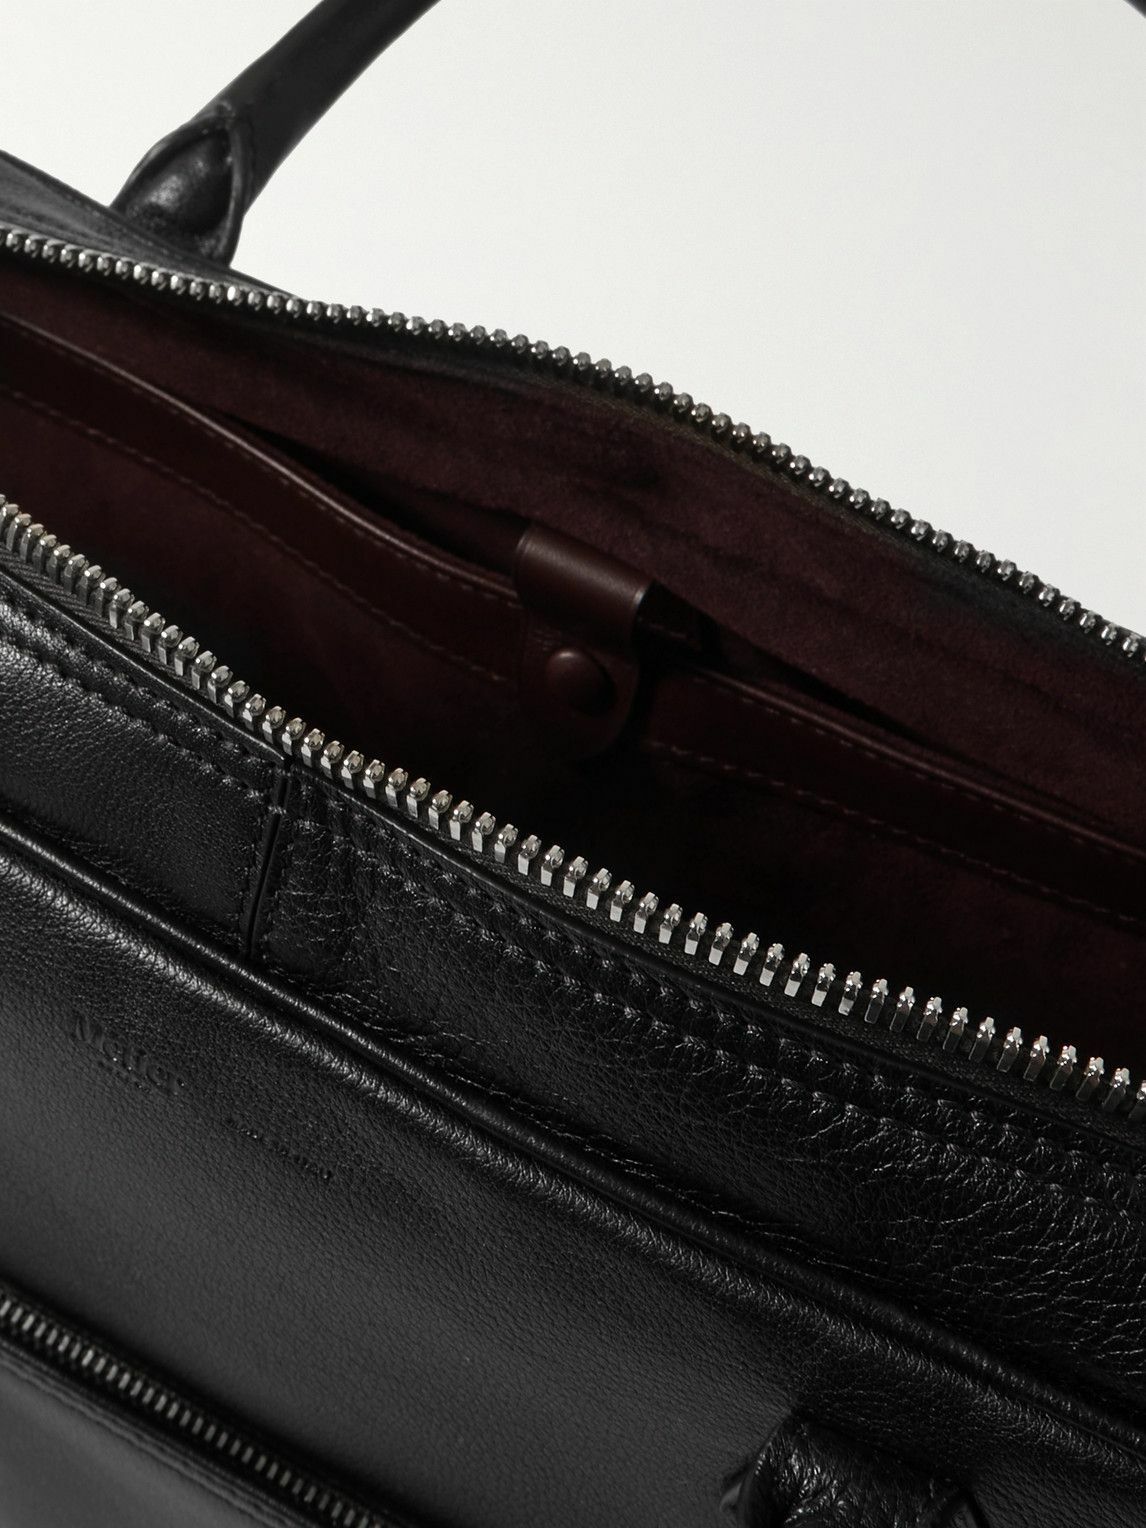 Métier - Closer All Day Full-Grain Leather Briefcase